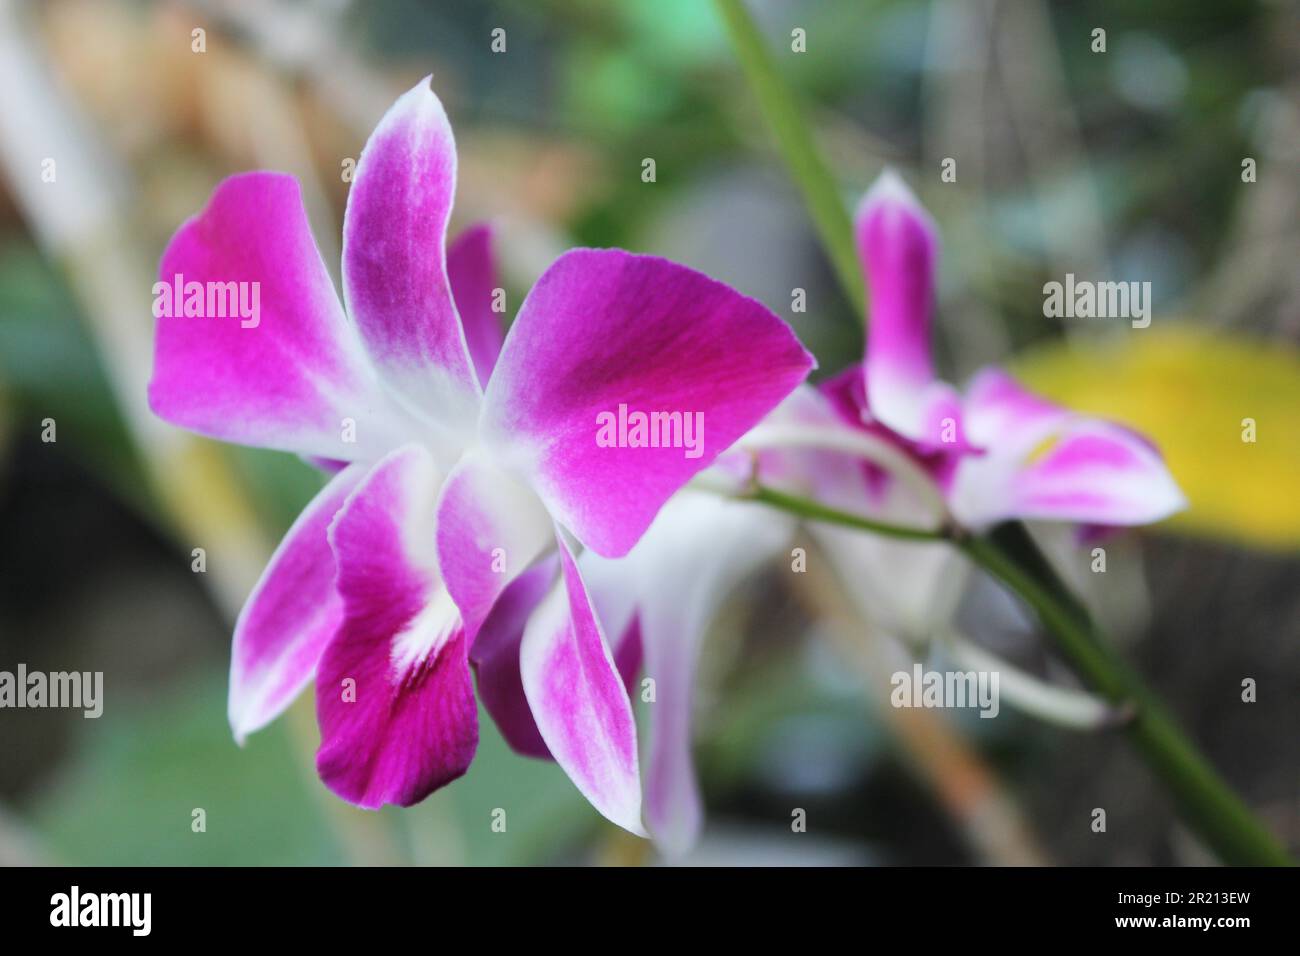 Orchid flower in white with purple petal tips in selective focus portrait with blur background Stock Photo